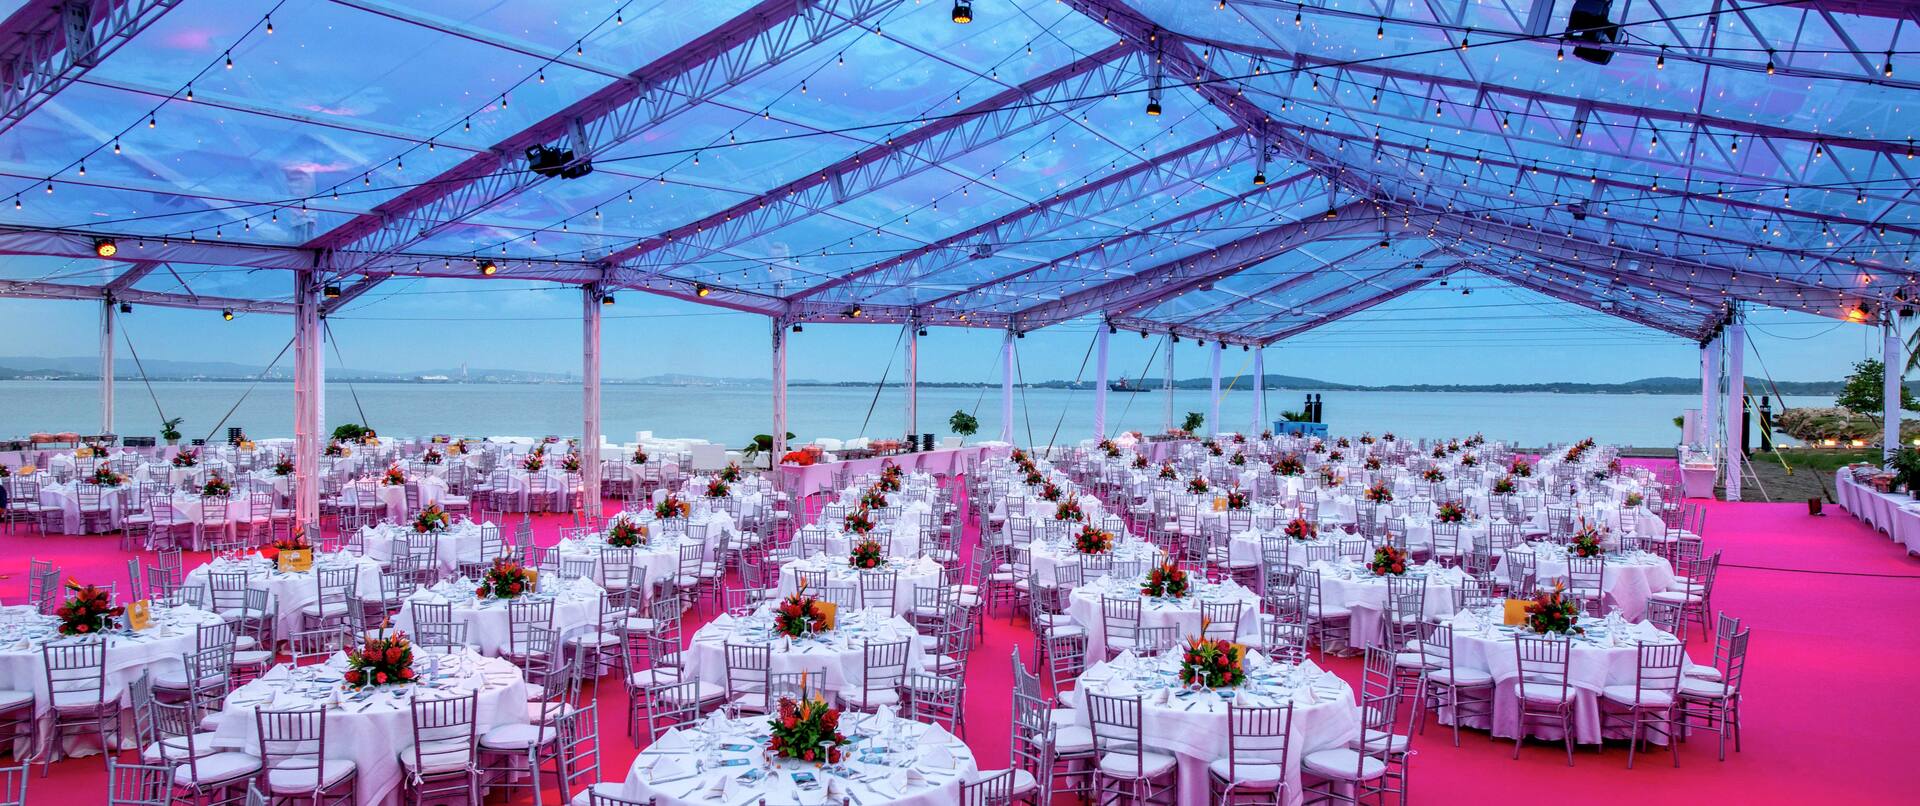 Covered Dining Event at the Beach